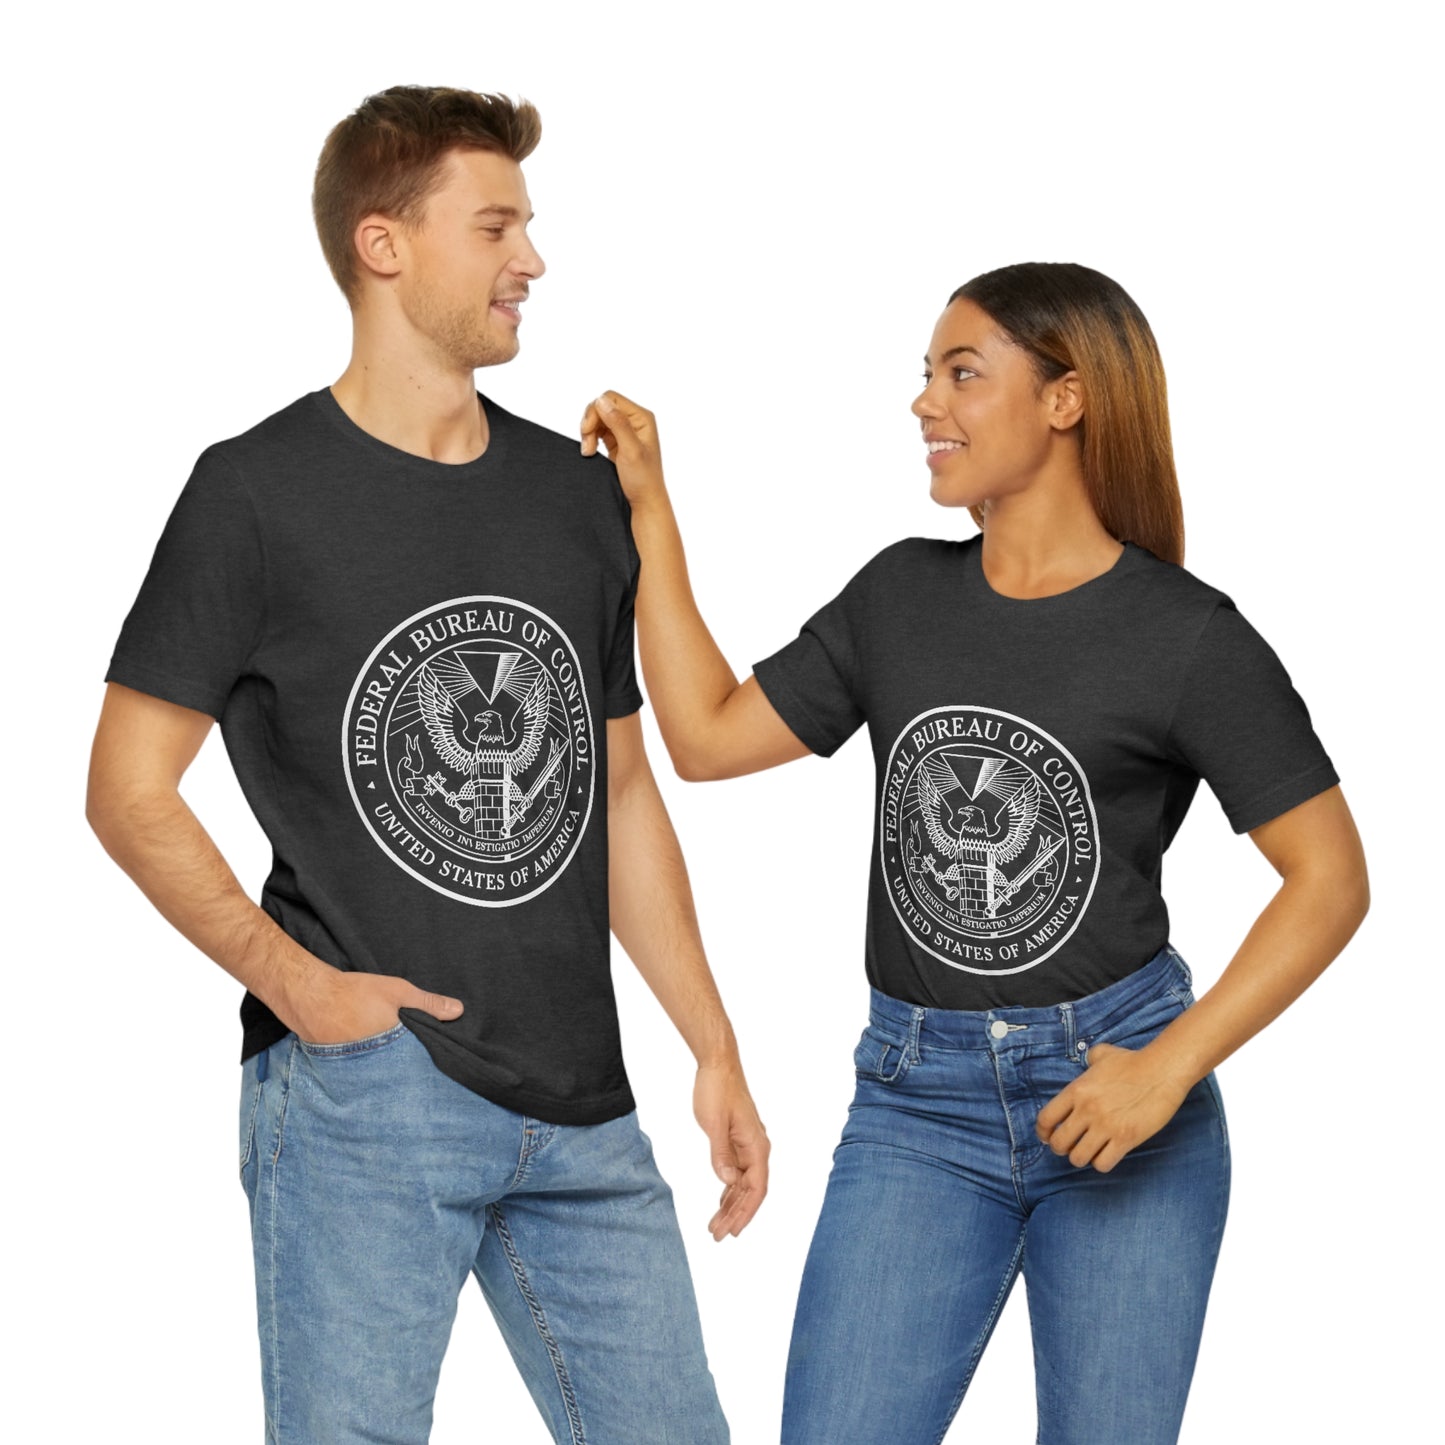 FBC Federal Bureau of Control Shirt Inspired by the video game Control Lord and Lady Towers